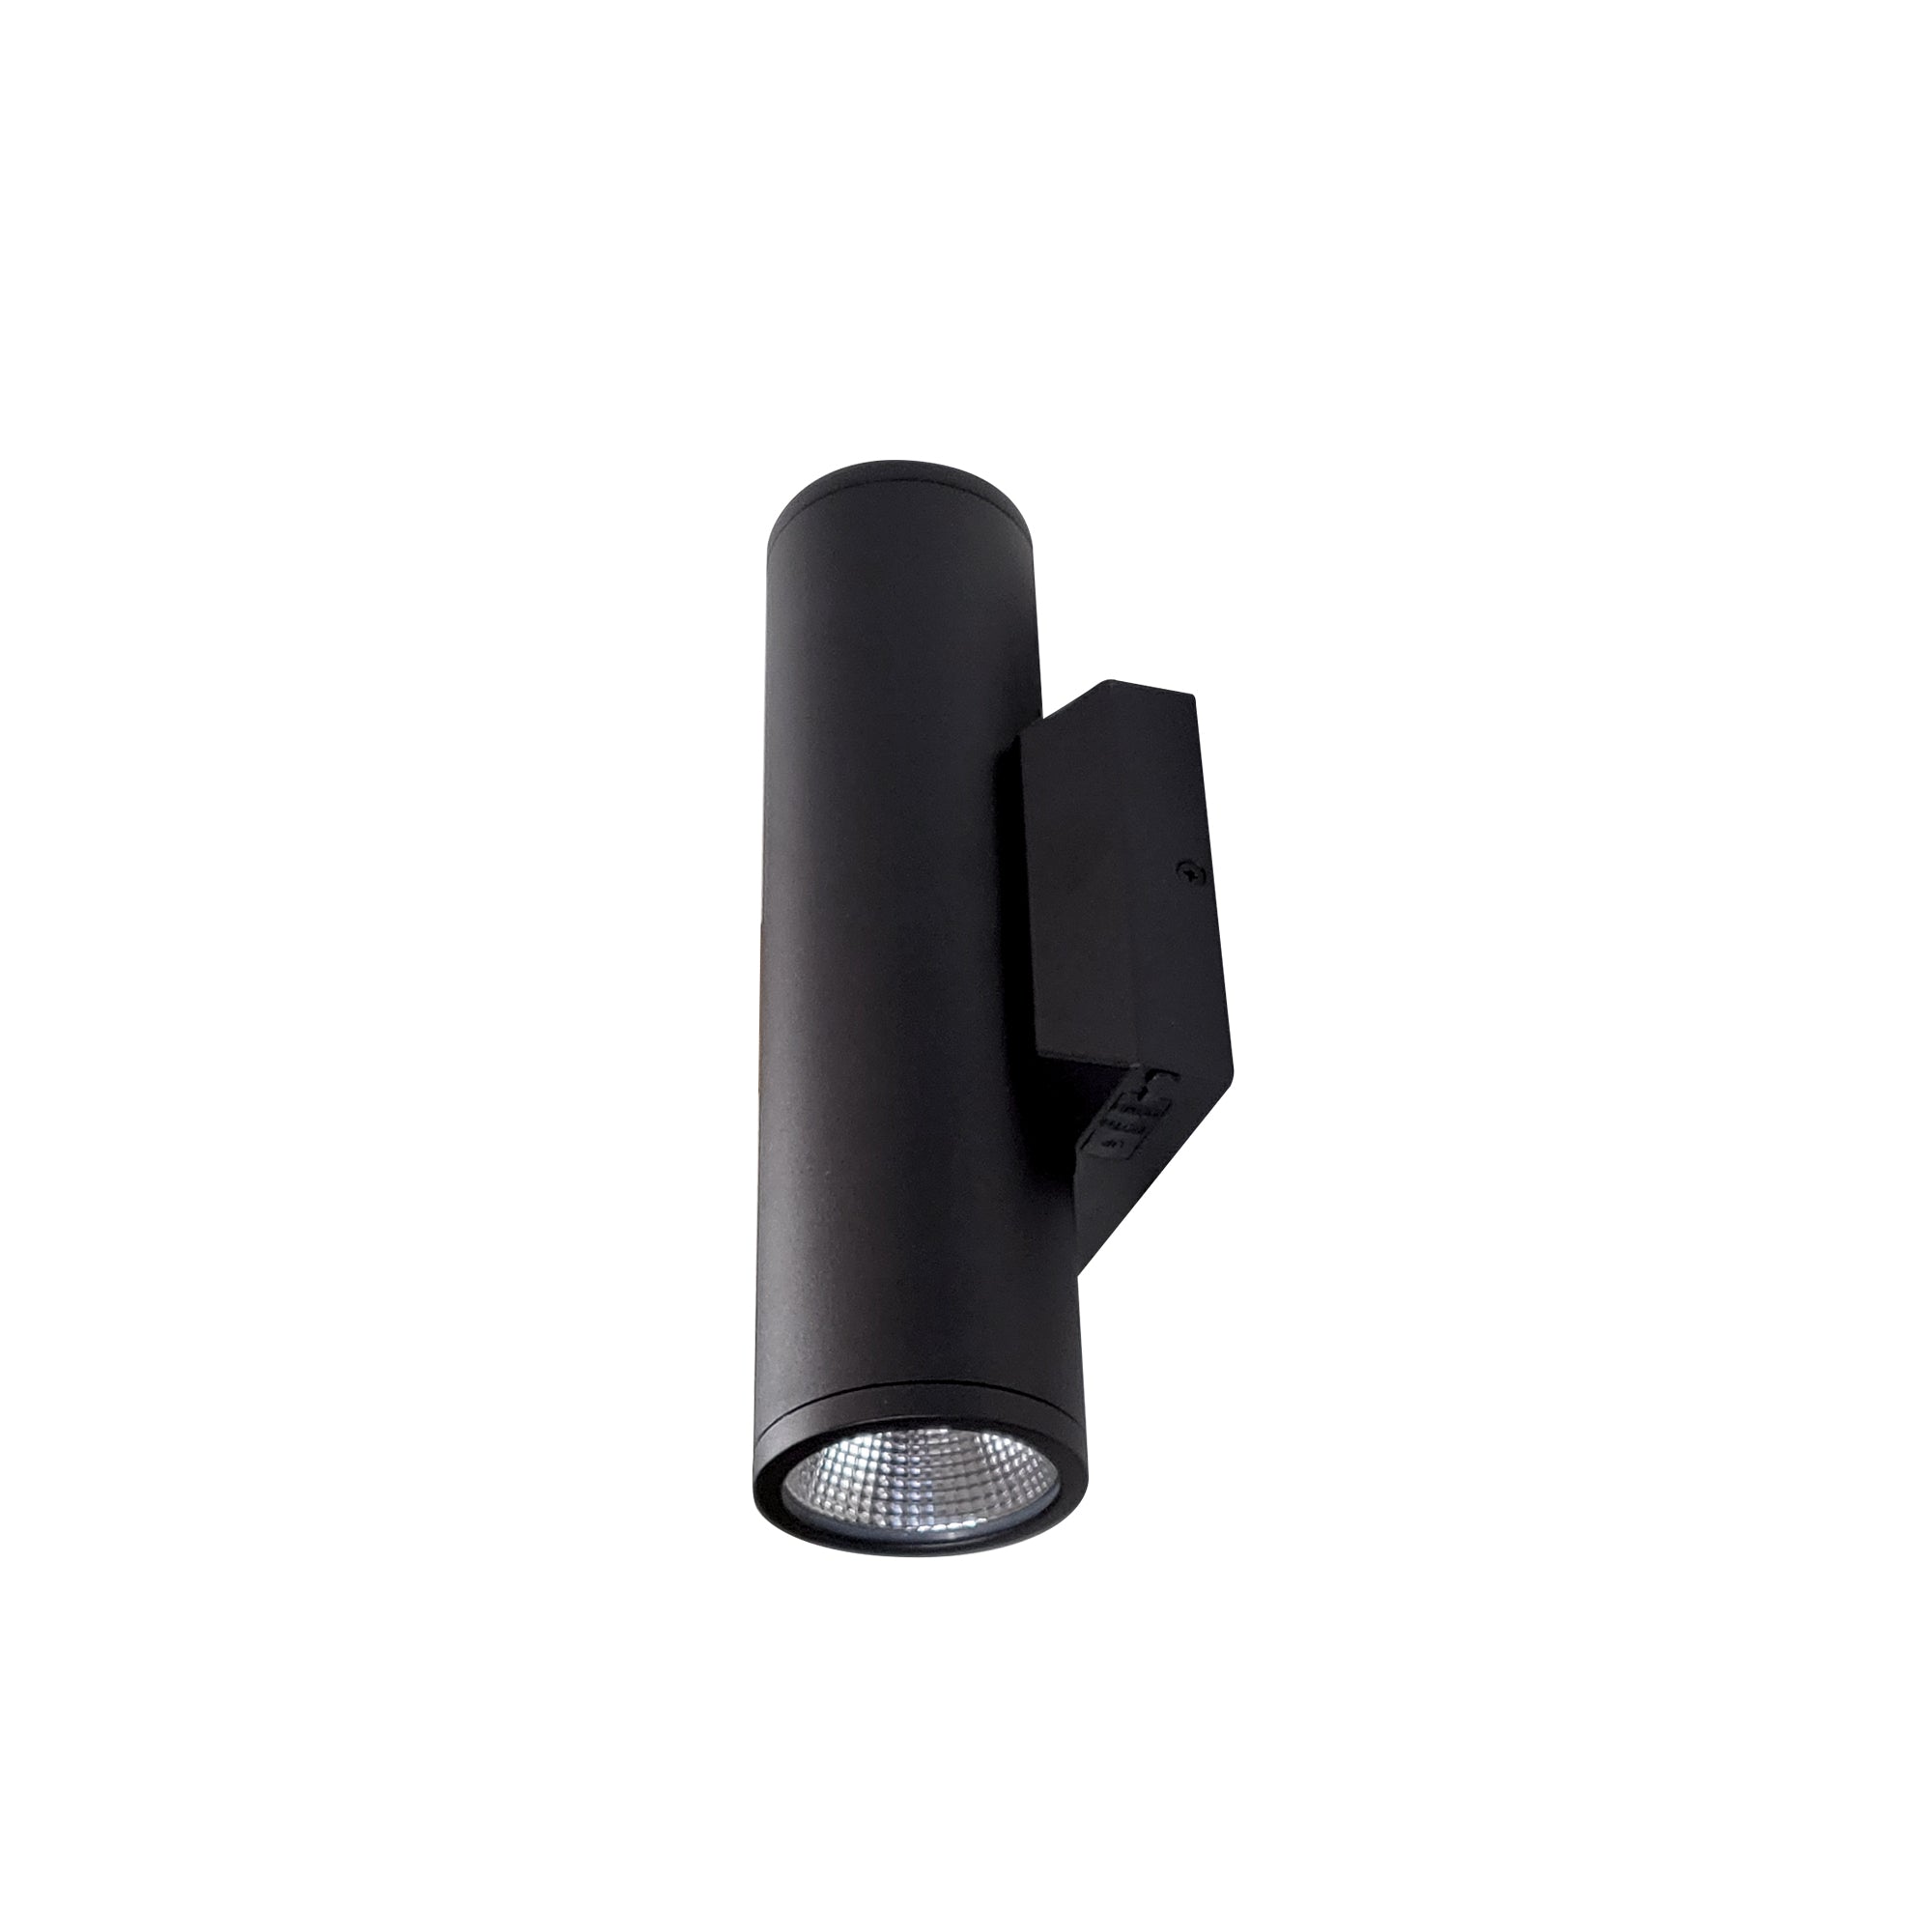 Nora Lighting NYUD-3L1345B - Cylinder - 3 Inch Up & Down Wall Mounted LED Cylinder with Selectable CCT, Black finish